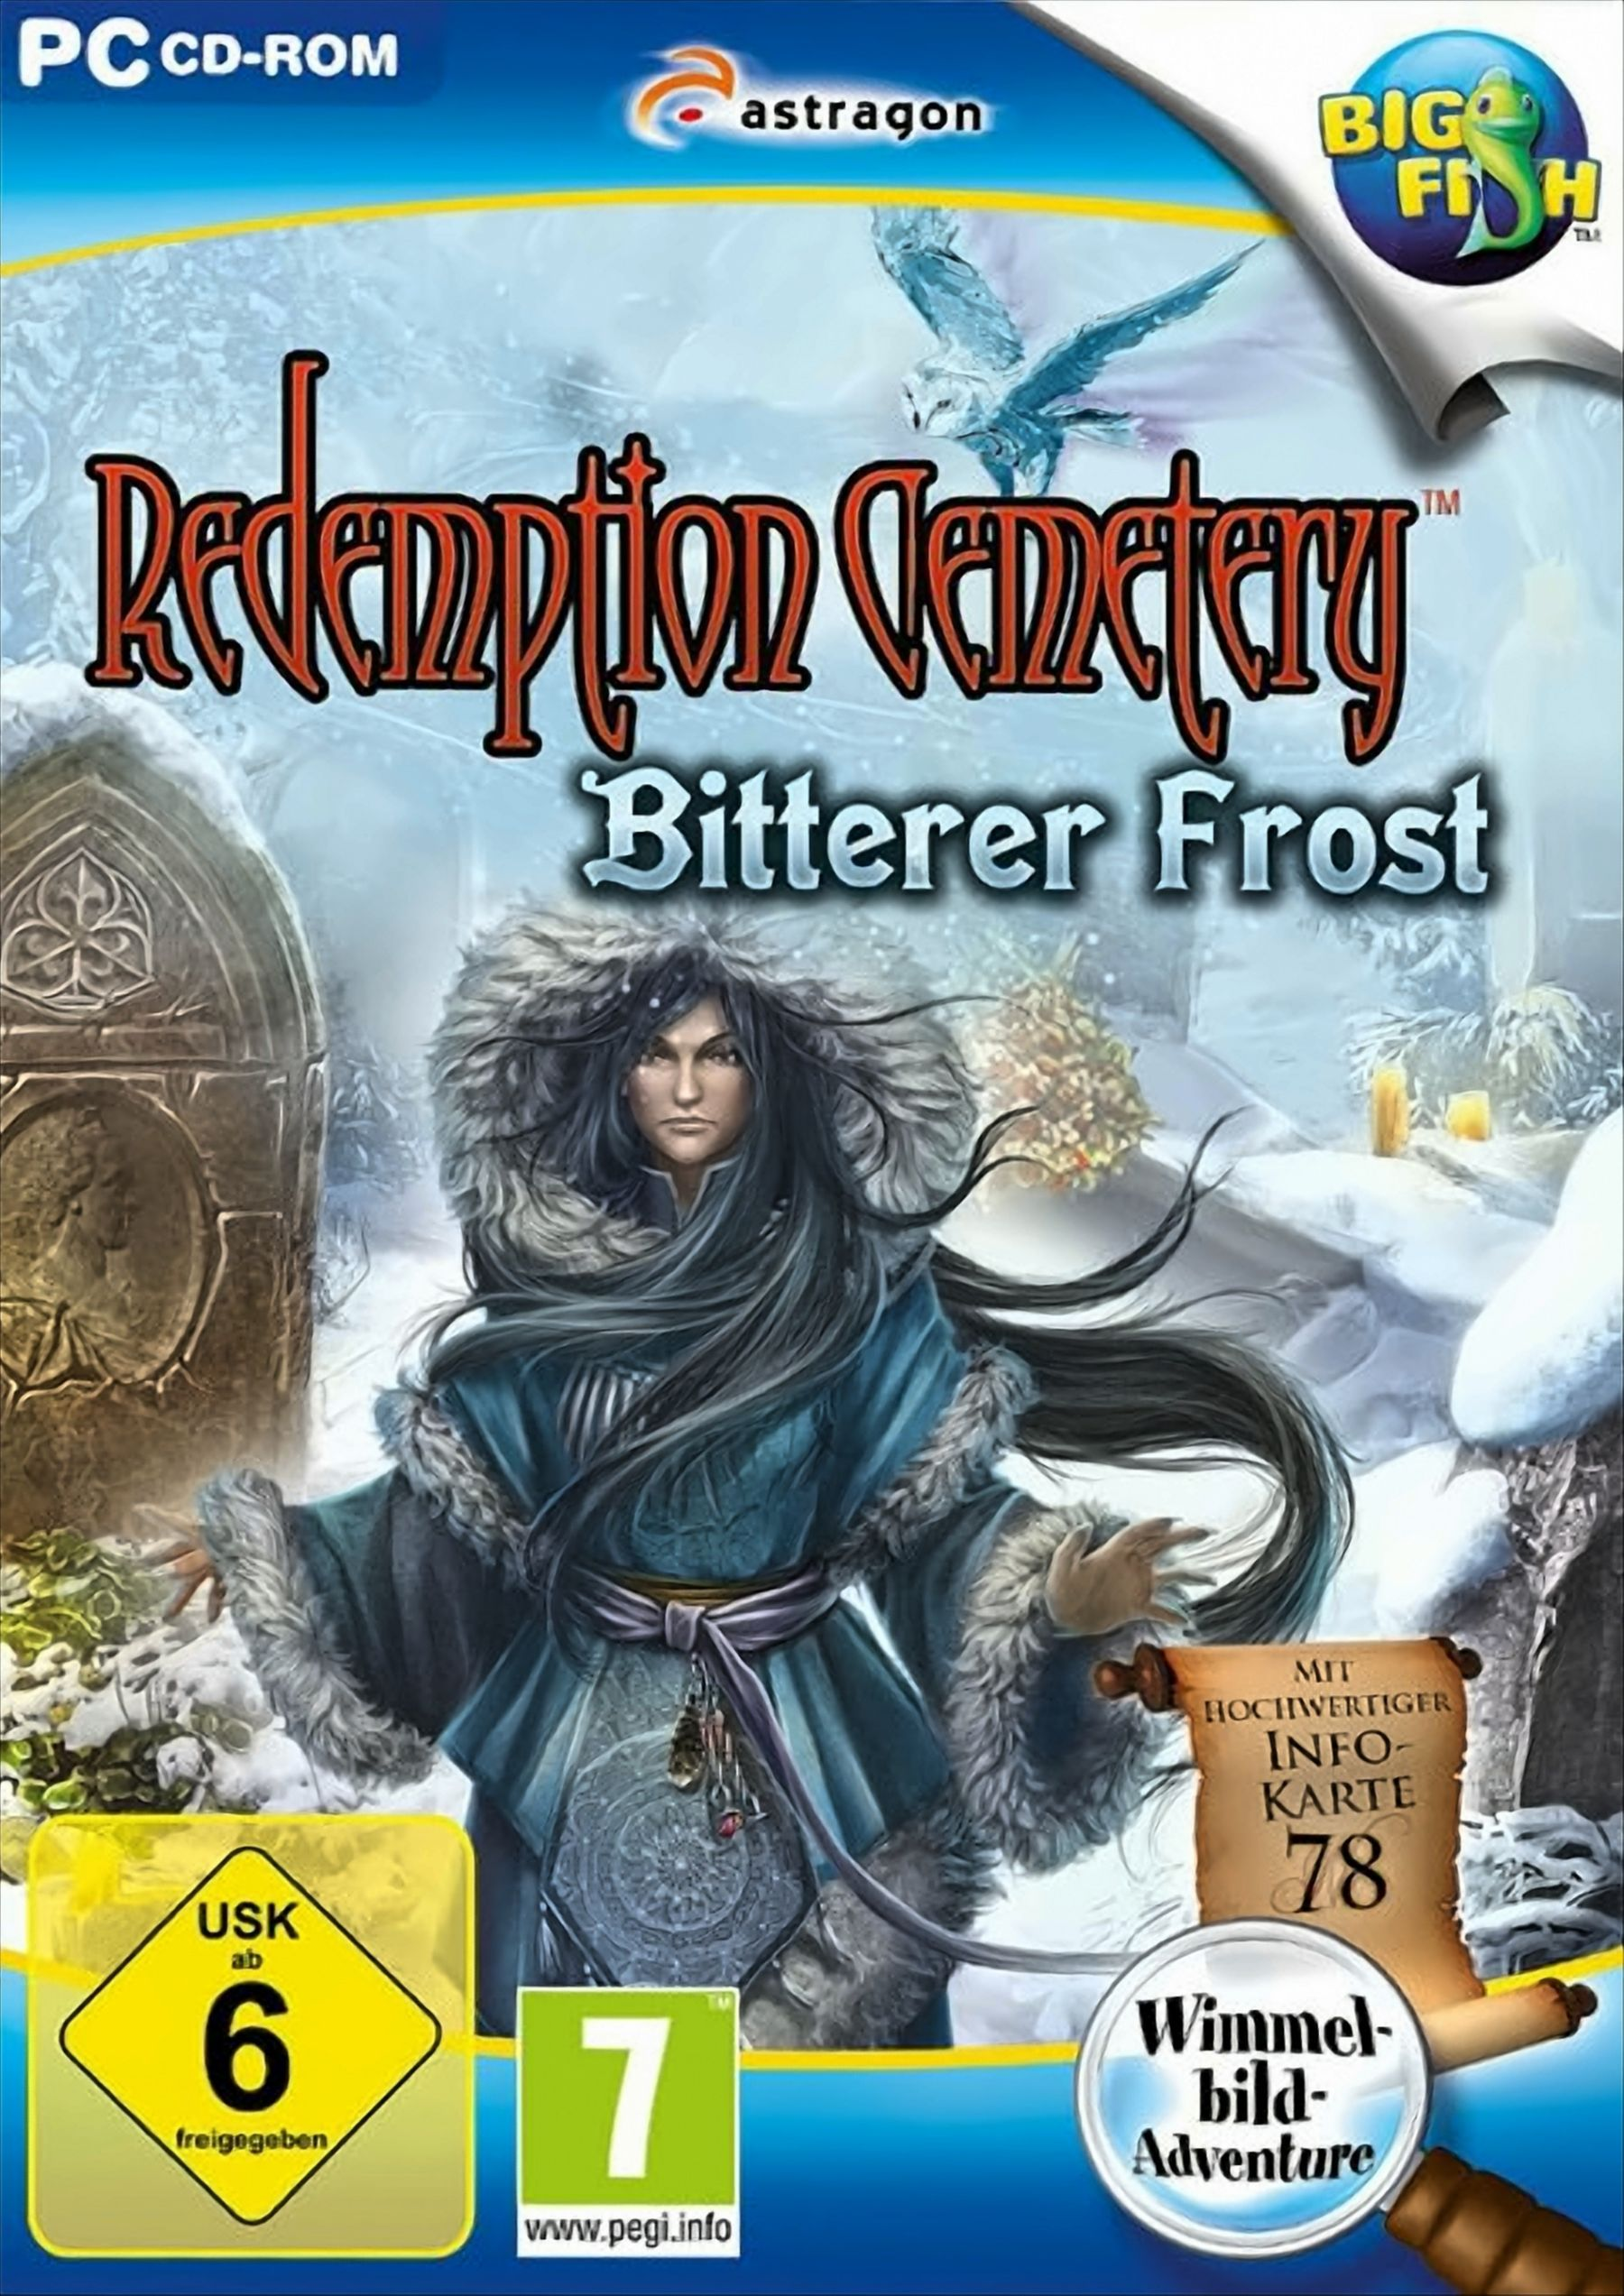 Redemption Cemetery: Bitterer Frost [PC] 